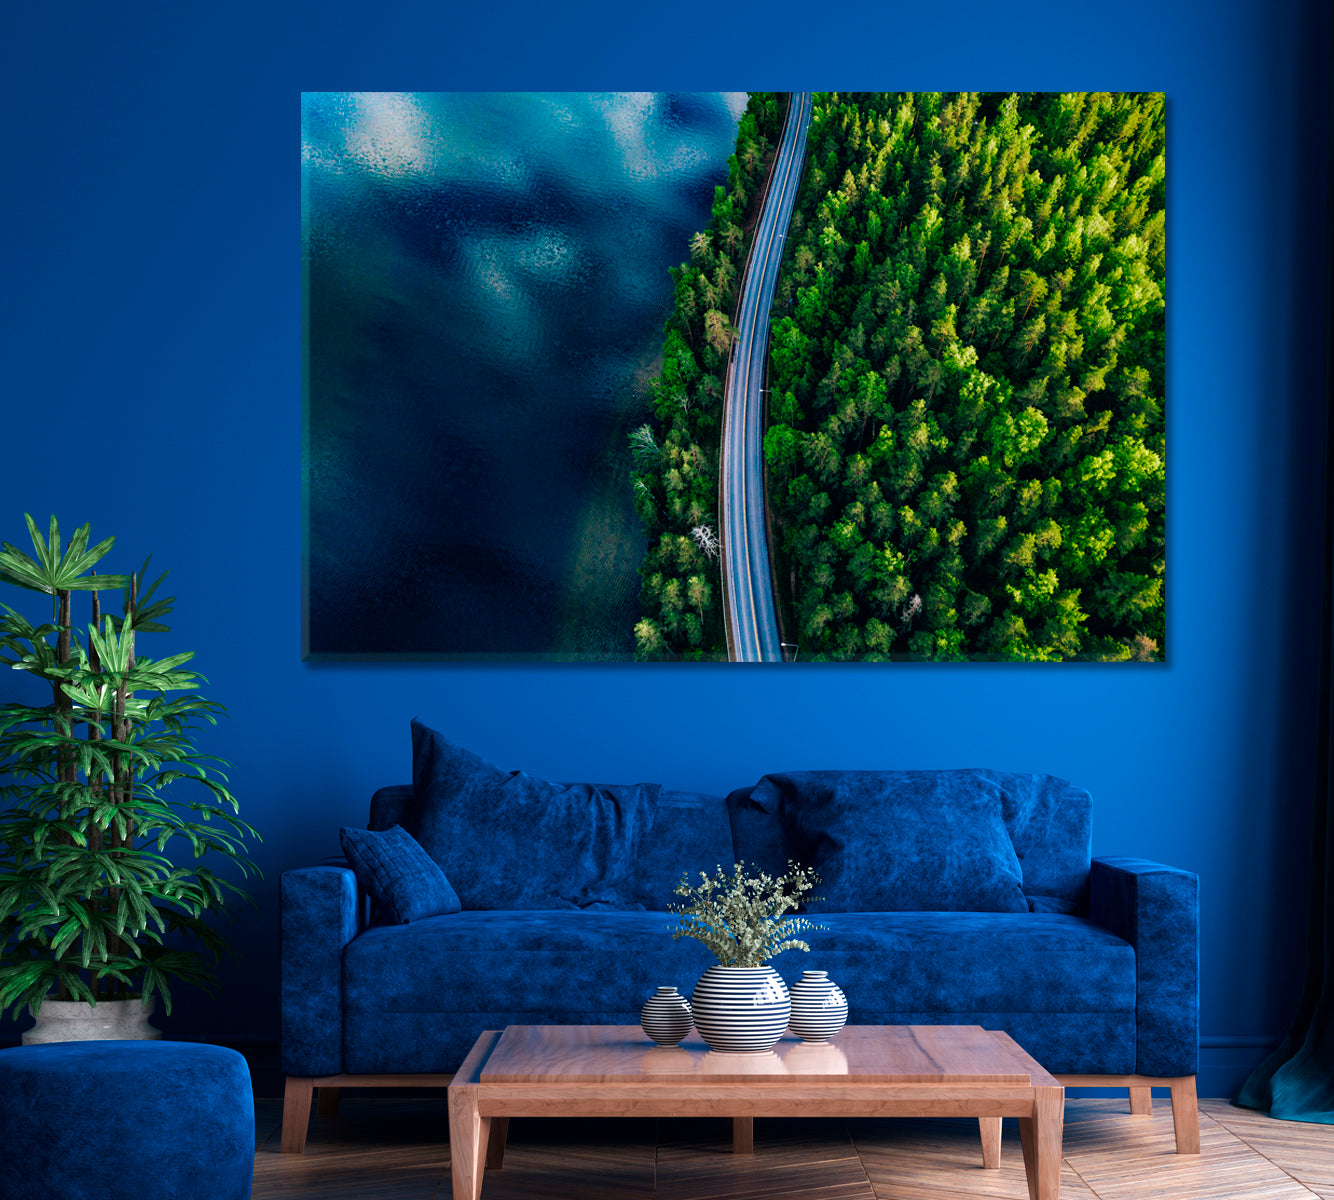 Forest and Blue Lake in Finland Canvas Print ArtLexy 1 Panel 24"x16" inches 